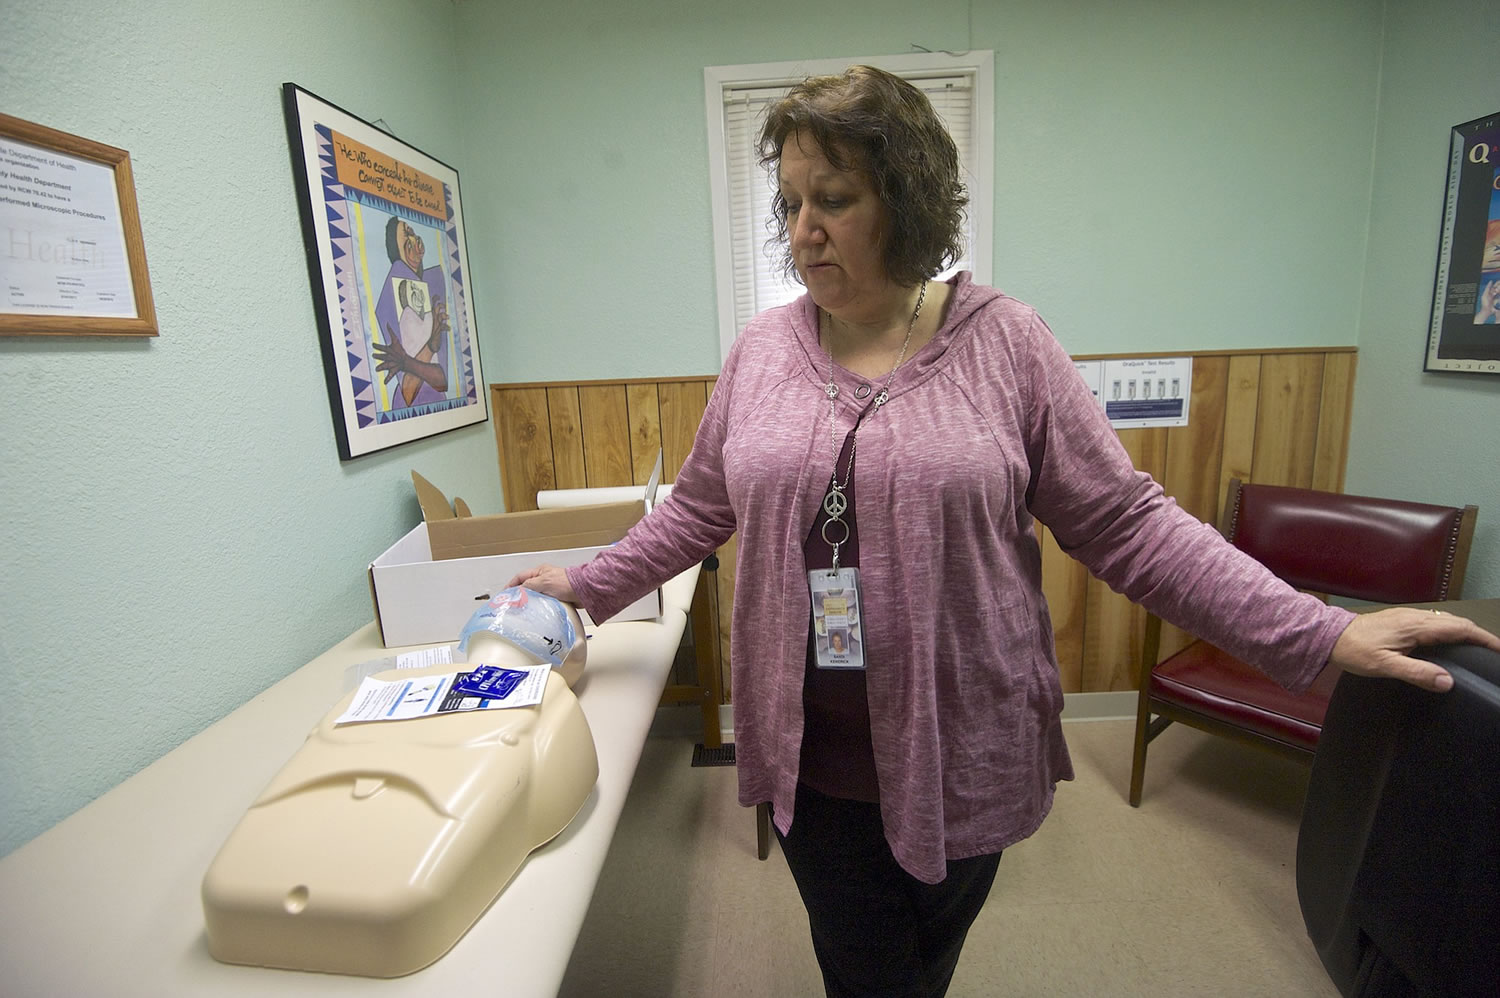 Clark County Public Health educator Sandi Kendrick looks down at a dummy used to demonstrate how to administer lifesaving measures given to clients in rescue kits, at the Harm Reduction Center.